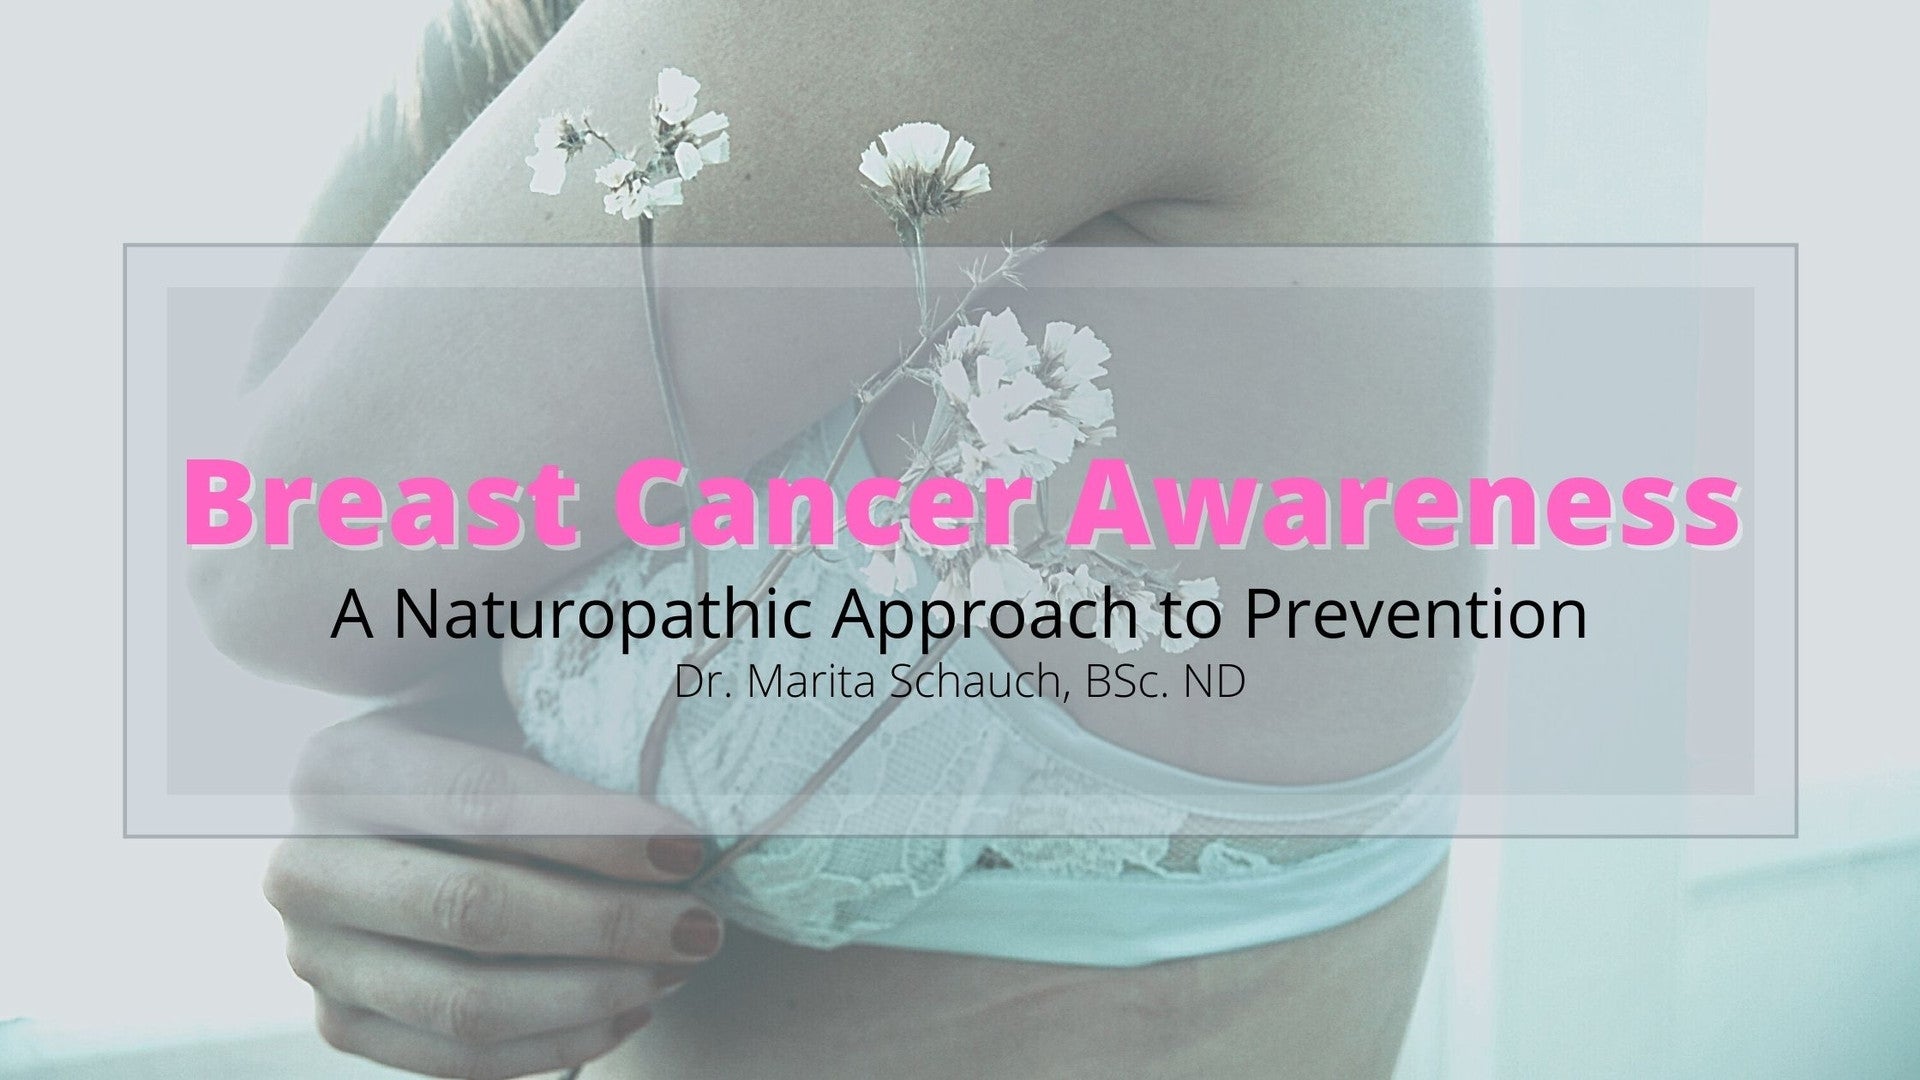 Breast Cancer Awareness - A Naturopathic Approach to Prevention